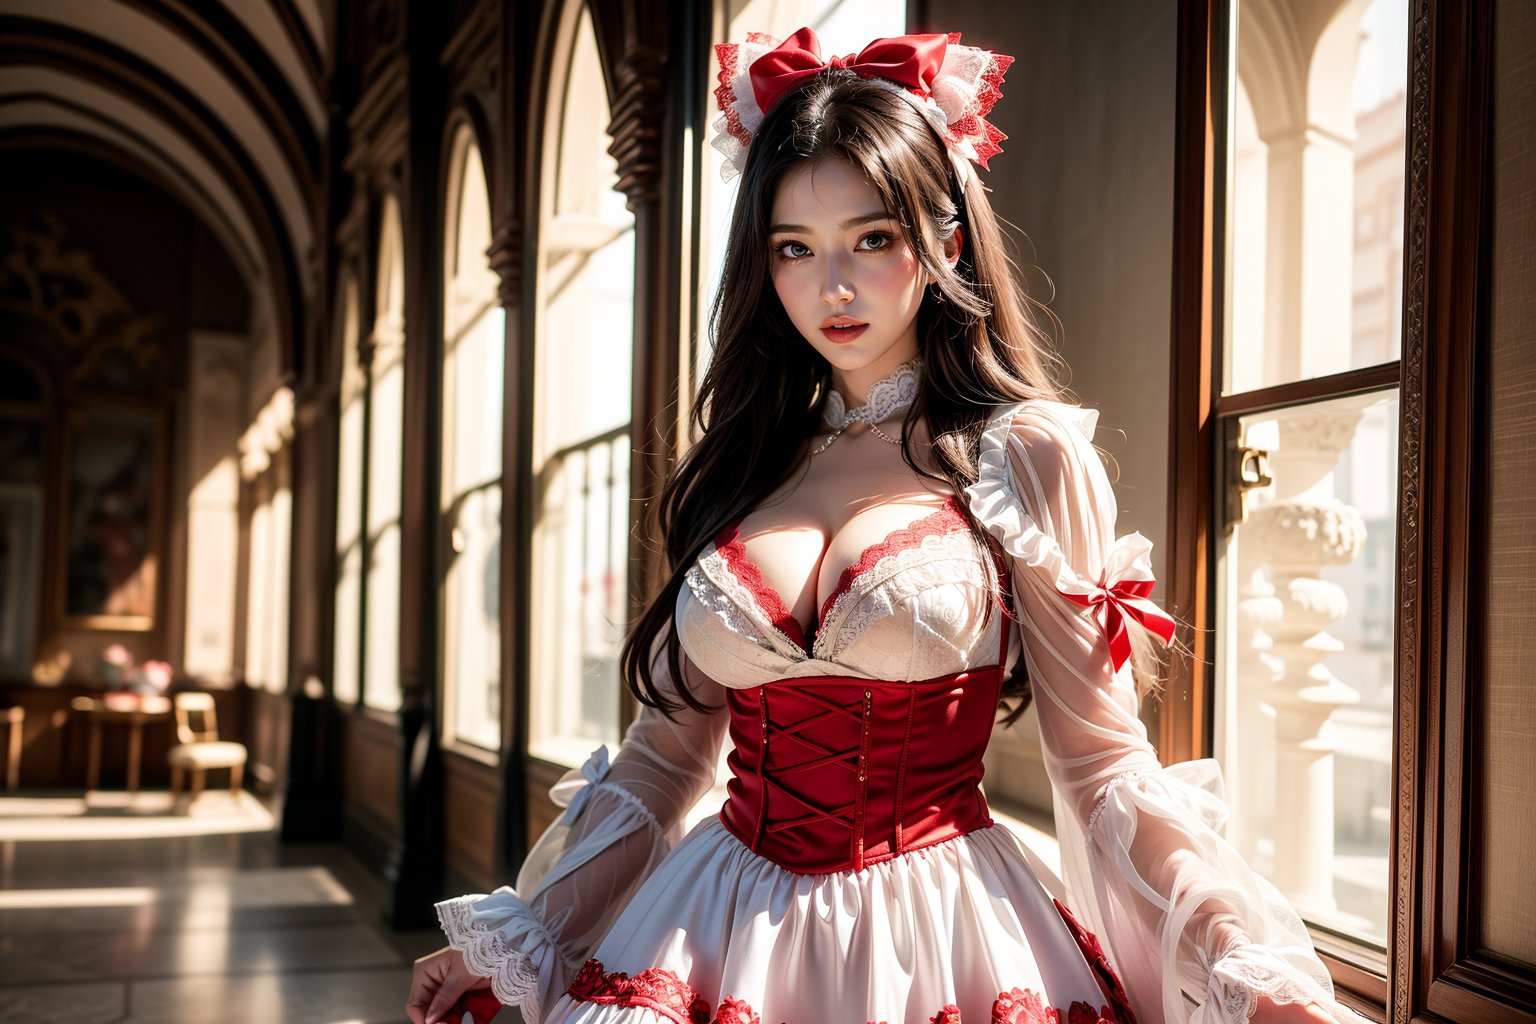 The picture shows a young woman wearing Lolita-style clothing, showing a fusion of modern and Victorian fashion aesthetics. The painting is centered on the protagonist standing in front of a classical arched window frame. Medium boobs, (((She wears a red and white tight maid outfit with a bow and lace trim))), and a matching headpiece. Her dark hair framed her face, while the background was a soft gray that accentuated her delicate attire. The dress's tiered ruffled skirt, bell sleeves and bodice added intricate details. The whole scene creates a charmingly nostalgic atmosphere with a modern twist.